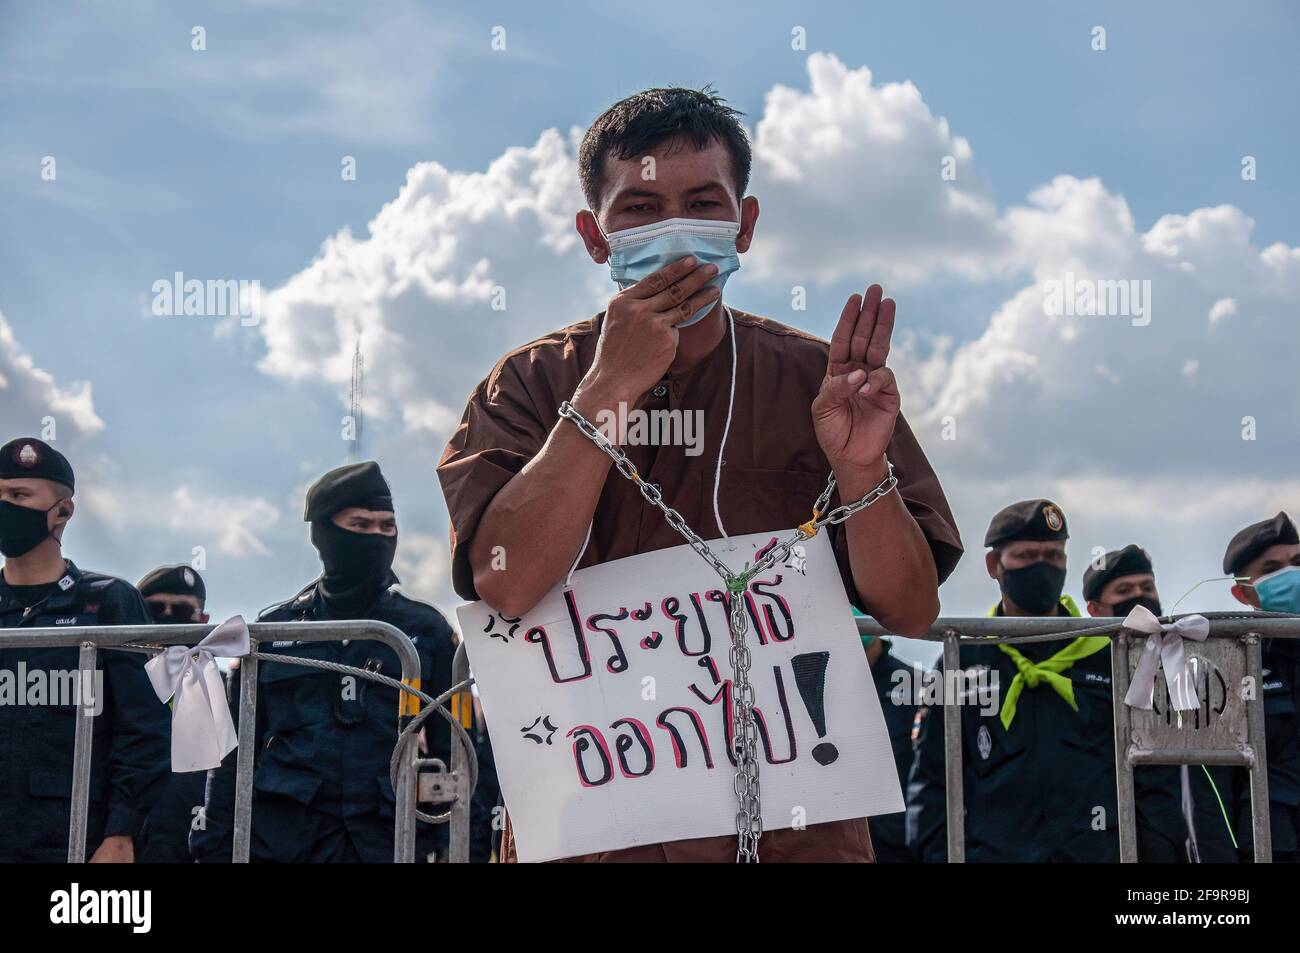 A protester makes a three-finger salute with chains wrapped around his hands during the demonstration. Protesters dress as prisoners during a demonstration outside the Government House in Bangkok to demand the release of detained pro-democracy activists who were charged by lese majeste law (Article 112 of the Thai criminal code). Pro-democracy protesters will stand silently for 112 minutes, a reference to the lese majeste law that is being actively used against the activists. (Photo by Peerapon Boonyakiat/SOPA Images/Sipa USA) Stock Photo